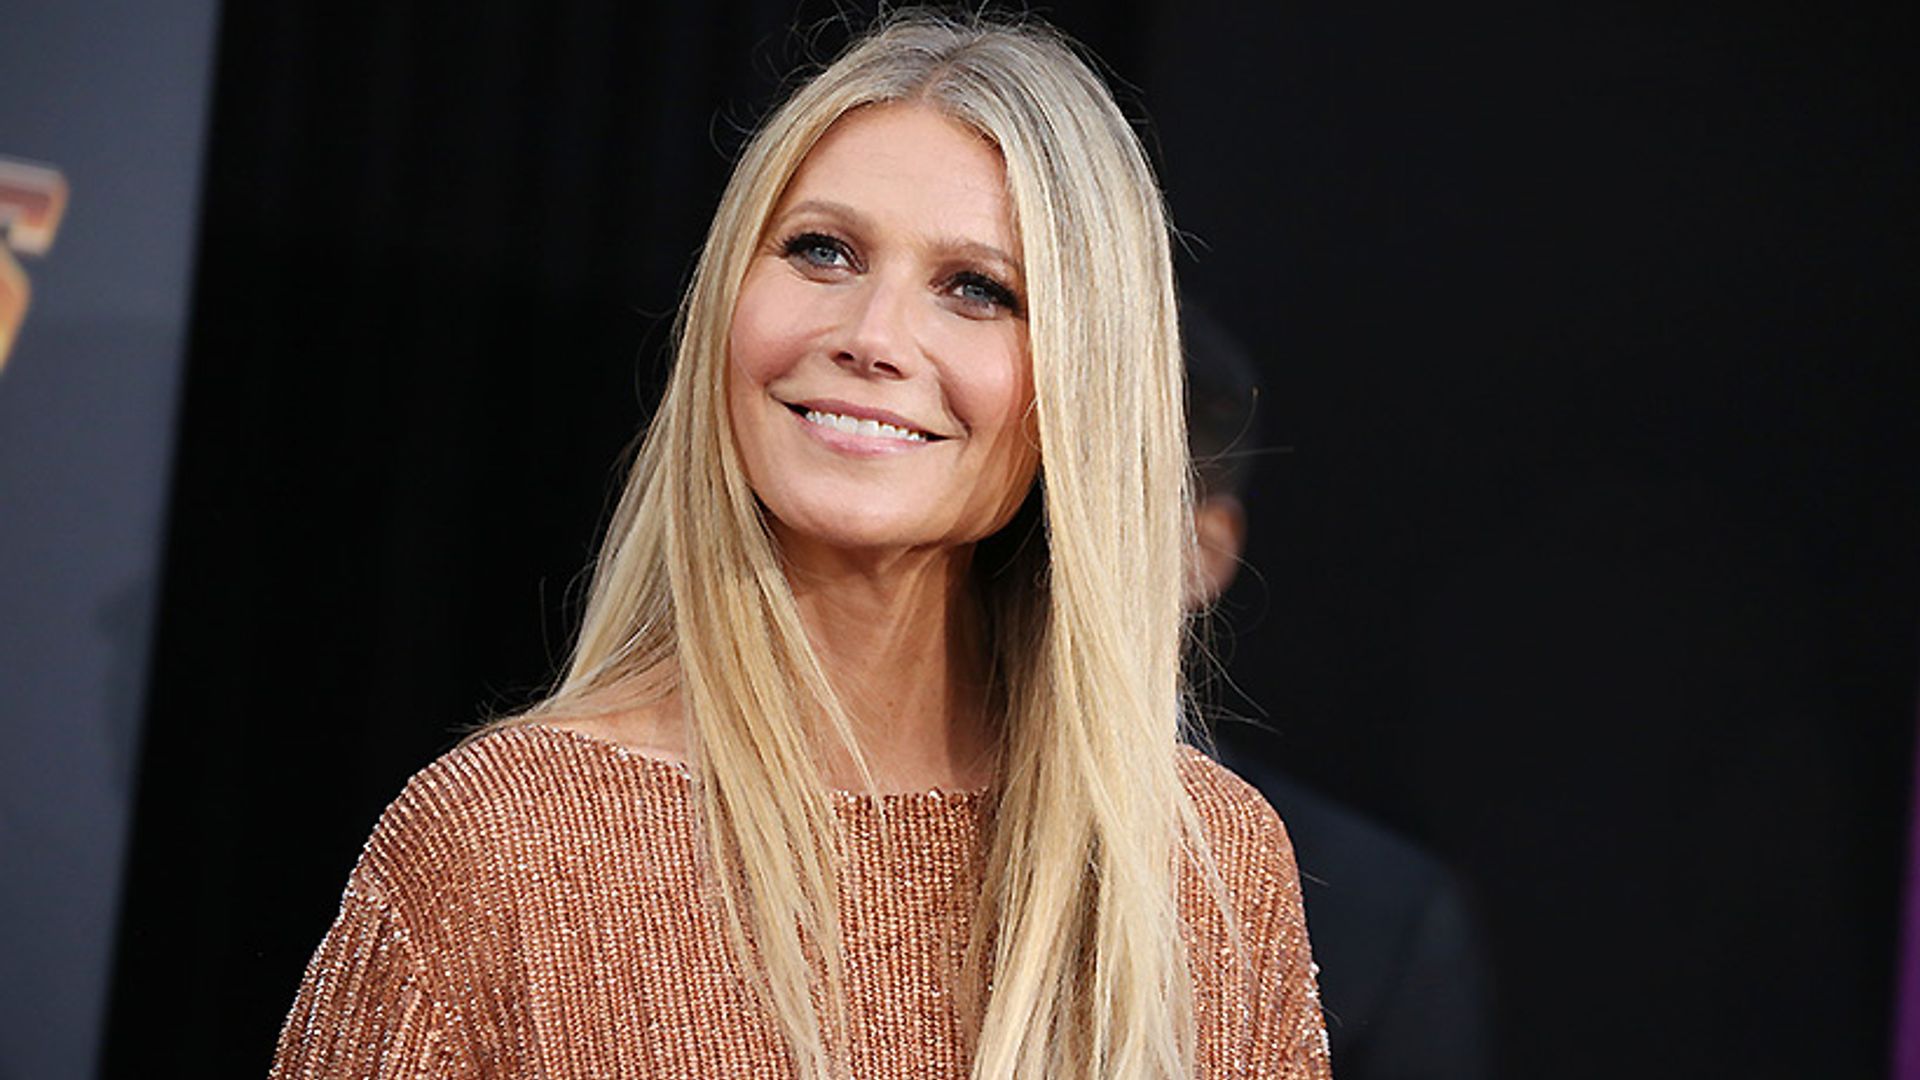 Gwyneth Paltrow confirms wedding to Brad Falchuk with sweetest picture